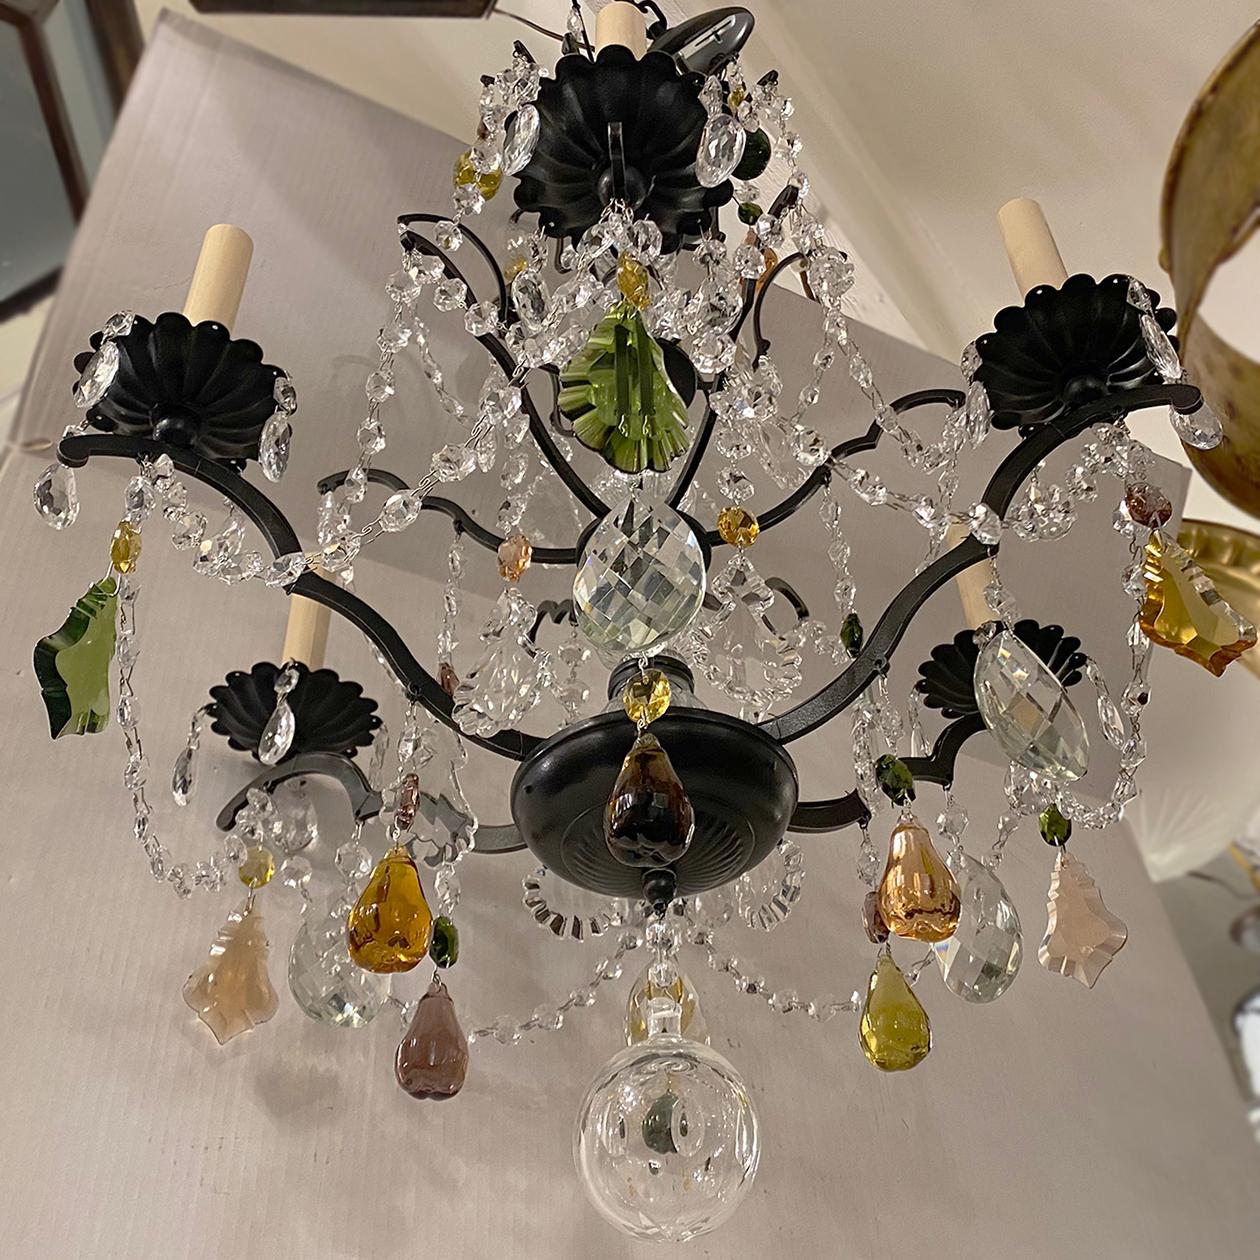 A circa 1940's French patinated bronze chandelier with crystal pendants and glass fruit.

Measurements:
Height: 32.5